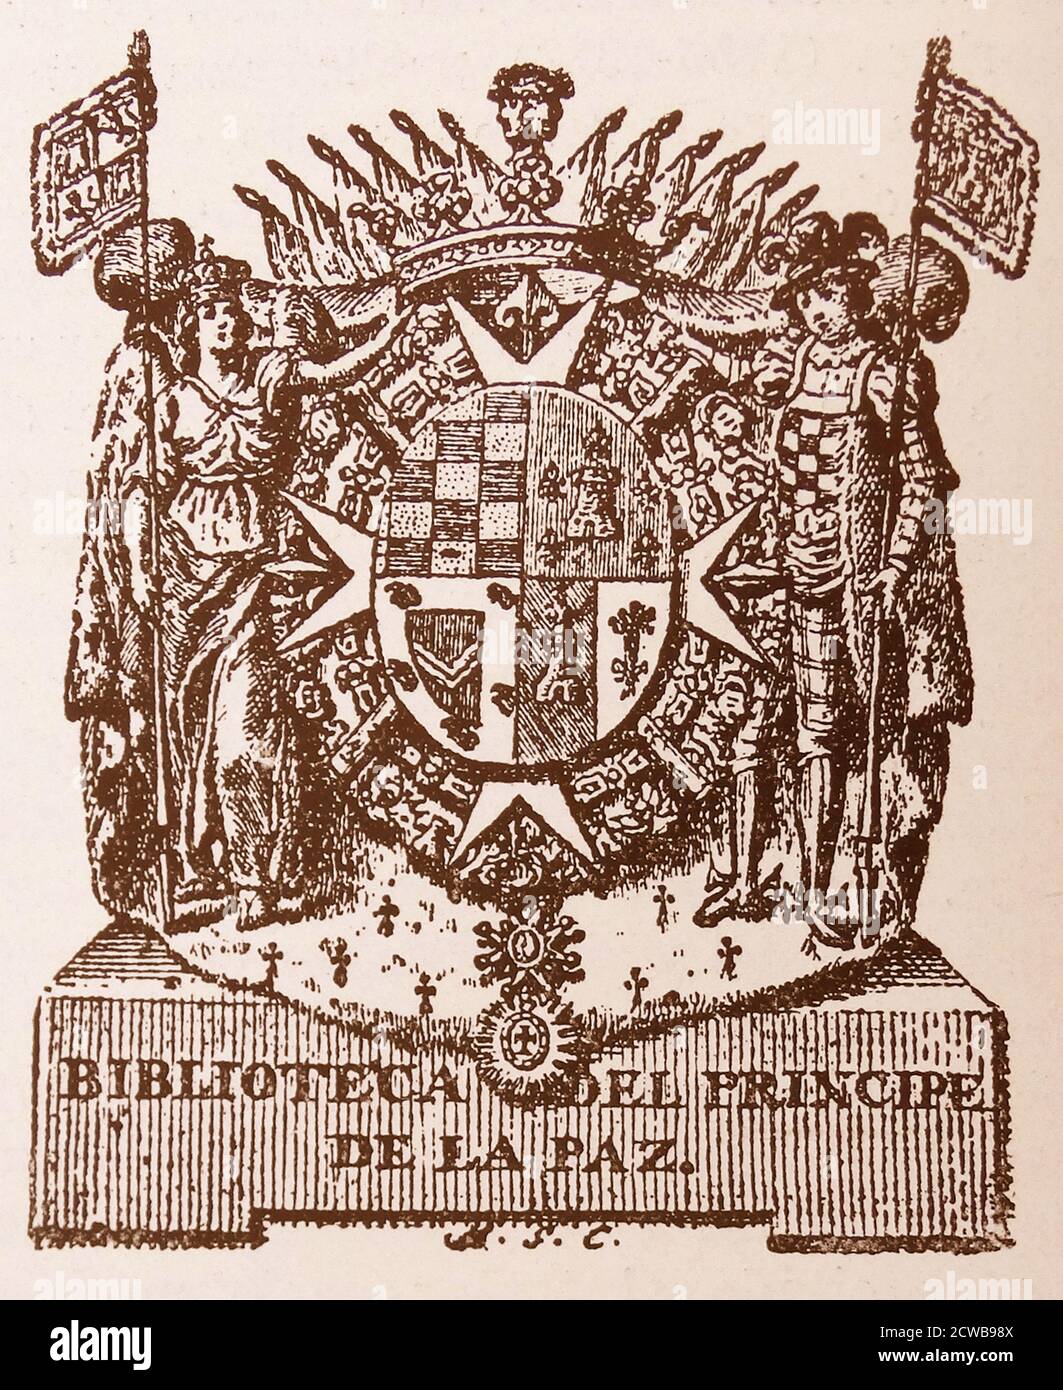 Crest of Manuel Godoy y Alvarez de Faria, Prince of Peace, 1st Duke of Alcudia, 1st Duke of Sueca, 1st Baron of Mascalbo (May 12, 1767 - October 4, 1851) was First Secretary of State of Spain from 1792 to 1797 and from 1801 to 1808. He received many titles, including Principe de la Paz ('Prince of Peace'), Stock Photo